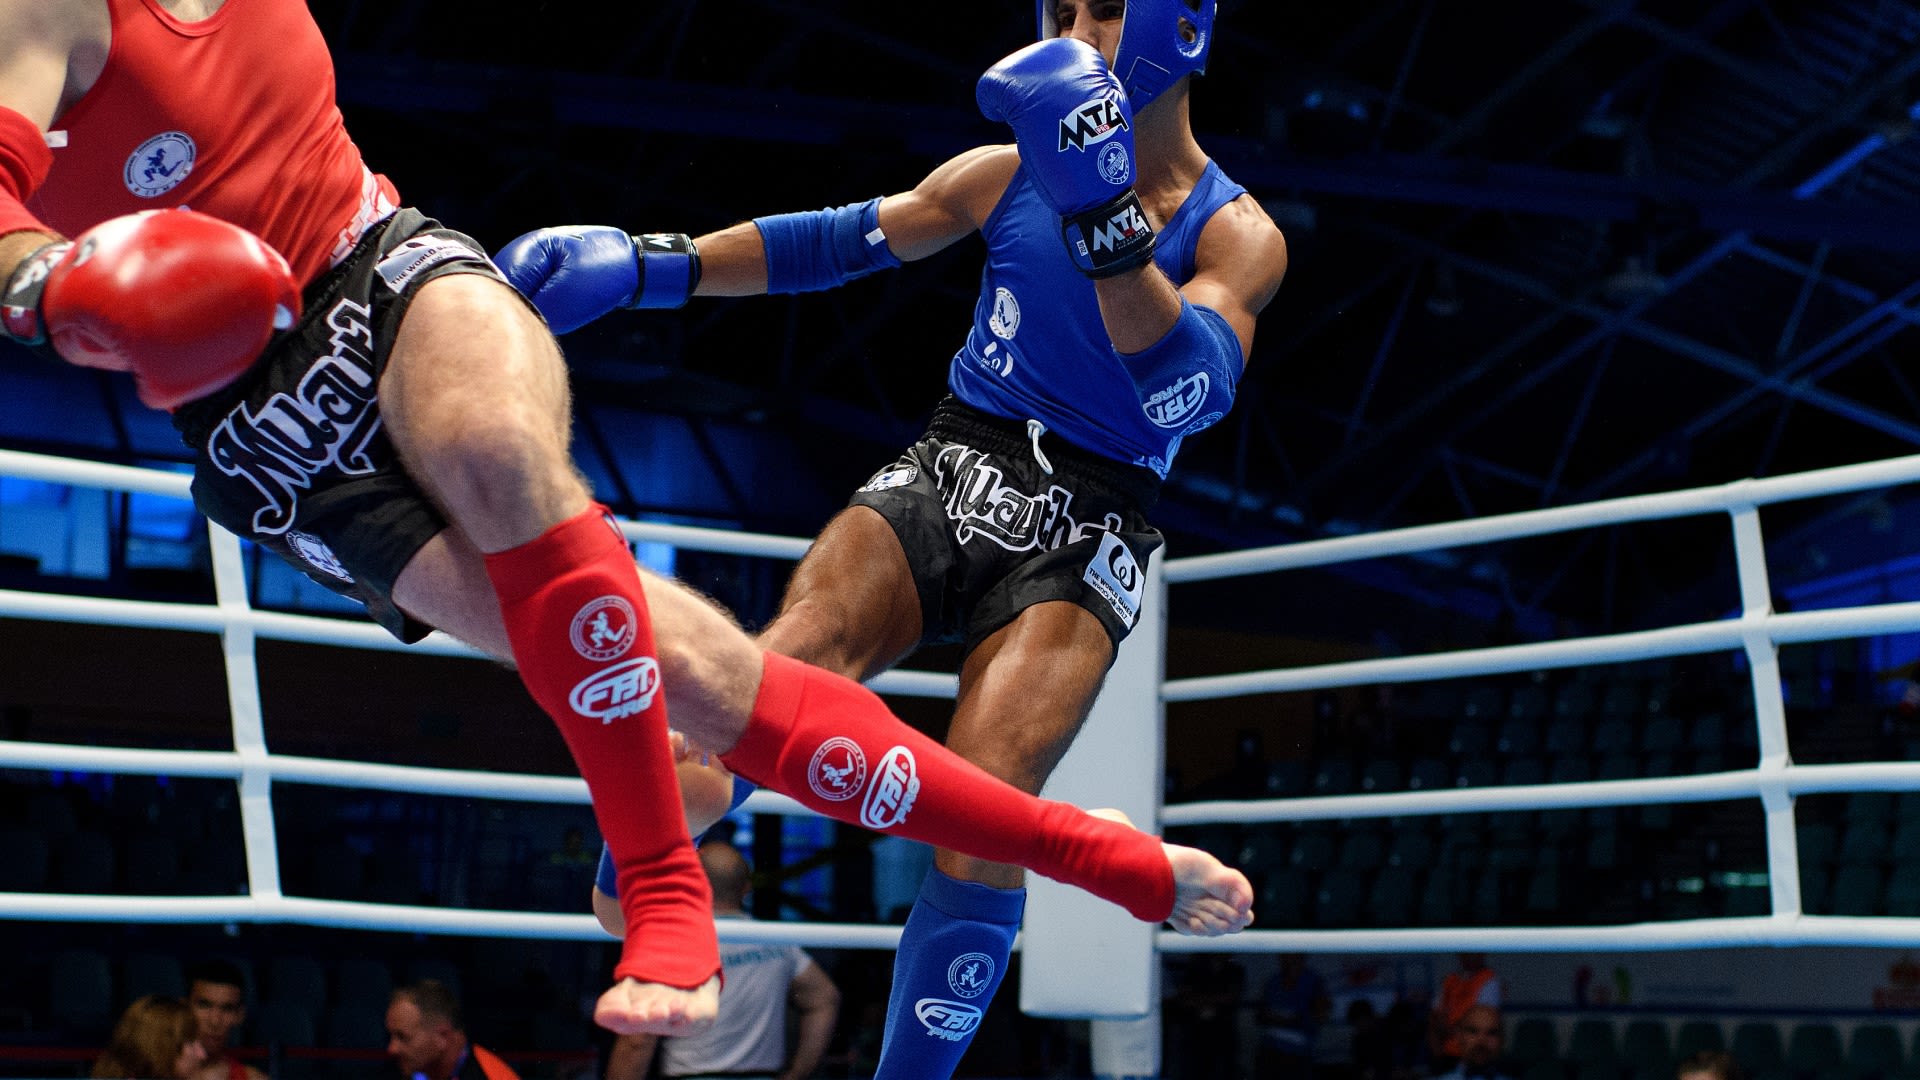 Muaythai World Championships 2023: Preview and how to watch the action live